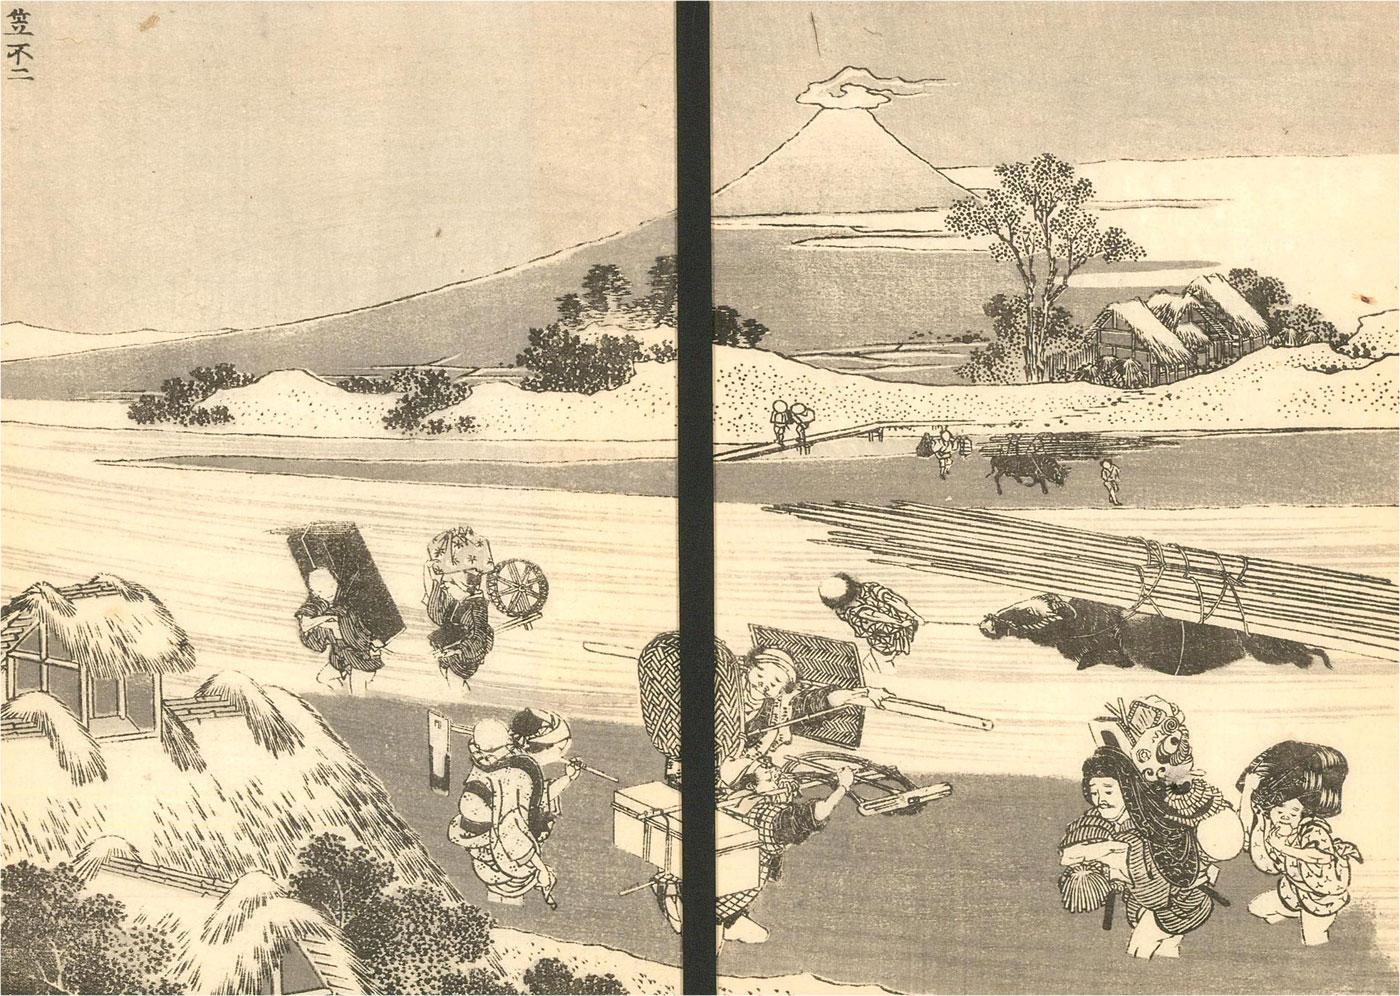 This print is from the series One Hundred Views of Mt. Fuji, published between 1835 and 1880. Hokusai evidently had a deep connection to the mountain, which had become a place of worship and pilgrimage for ascetic Buddhists and Shinto sects alike.